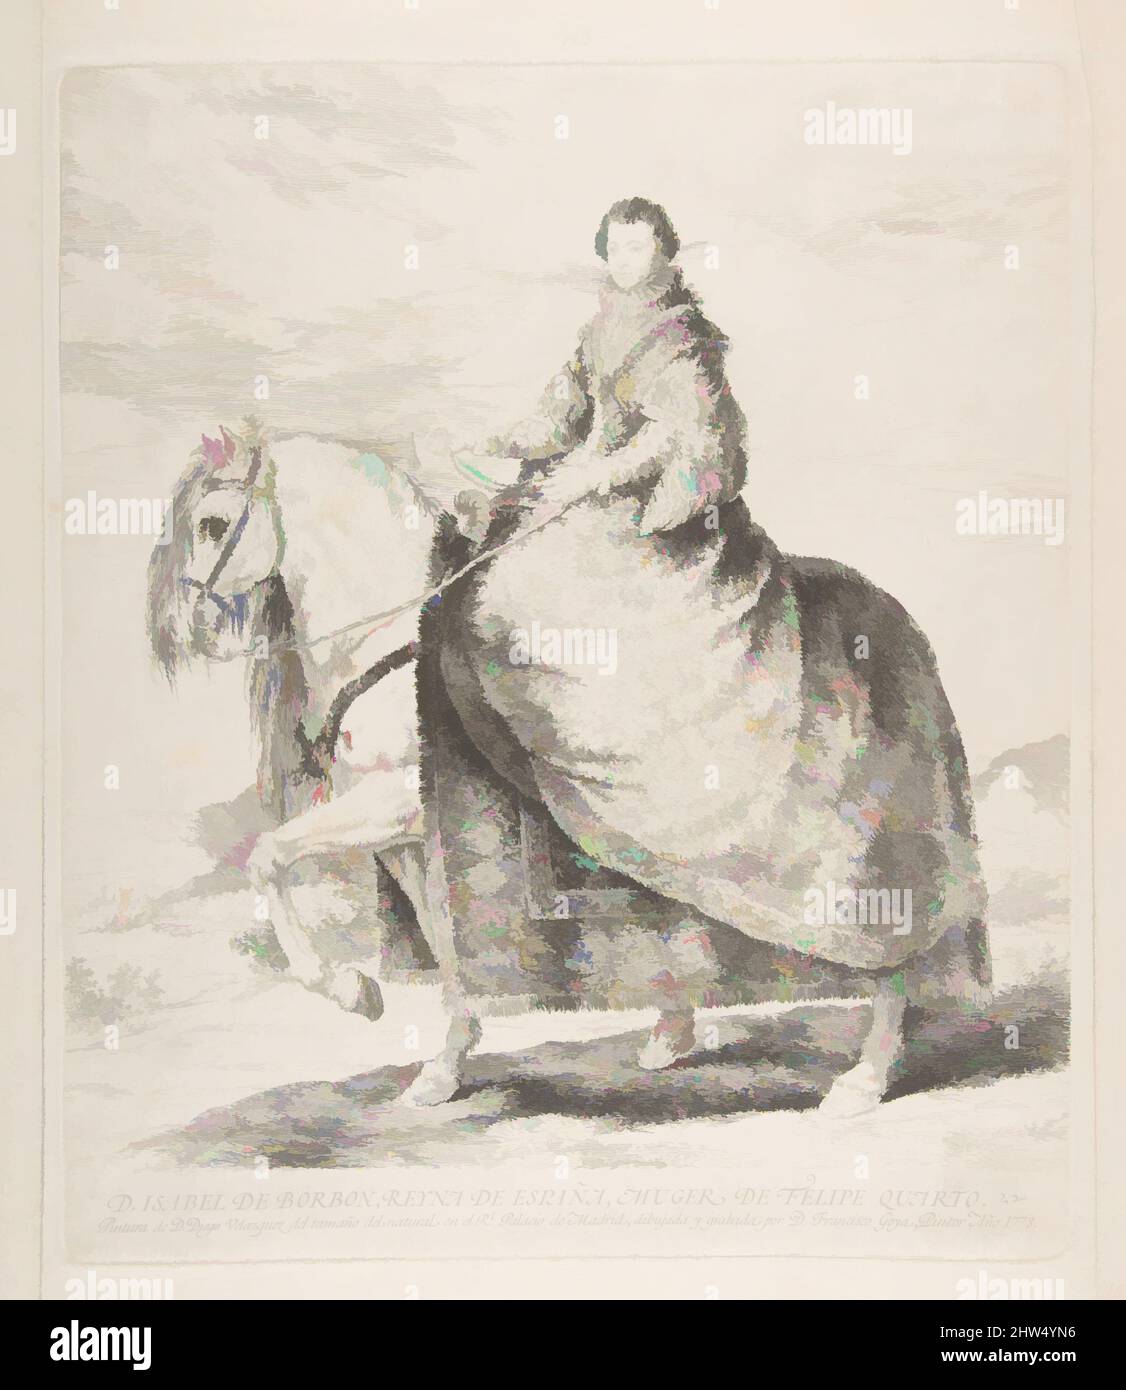 Art inspired by Isabel de Bourbon on horseback, after Velázquez, 1778, Etching and drypoint, Plate: 14 9/16 × 12 1/4 in. (37 × 31.1 cm), Prints, Goya (Francisco de Goya y Lucientes) (Spanish, Fuendetodos 1746–1828 Bordeaux), After Velázquez (Diego Rodríguez de Silva y Velázquez) (, Classic works modernized by Artotop with a splash of modernity. Shapes, color and value, eye-catching visual impact on art. Emotions through freedom of artworks in a contemporary way. A timeless message pursuing a wildly creative new direction. Artists turning to the digital medium and creating the Artotop NFT Stock Photo